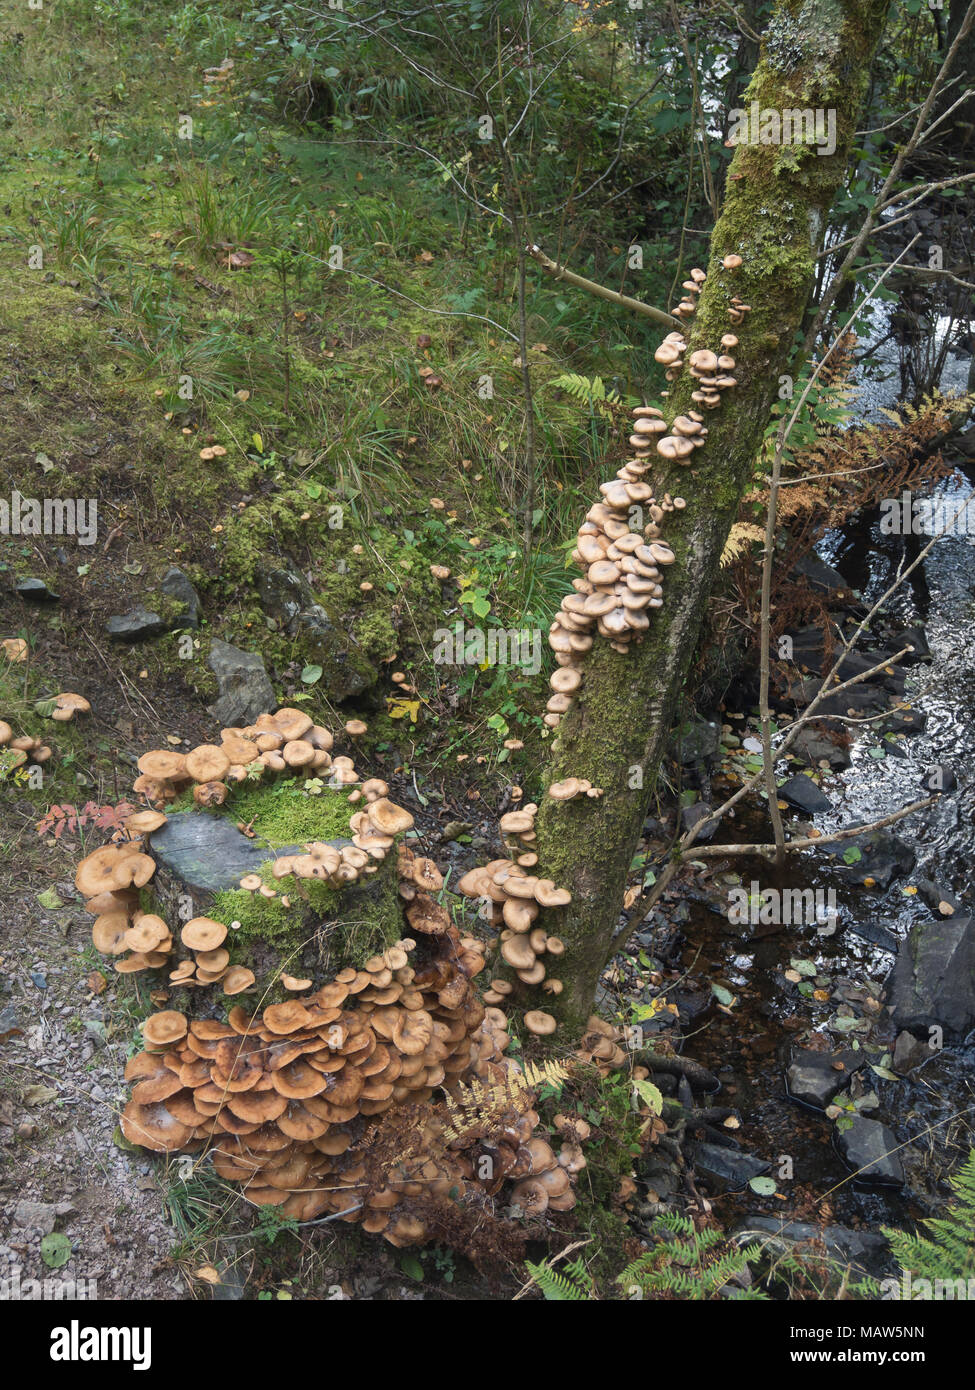 Honey fungus or Armillaria on a dead tree trunk in the Lillomarka forest in Oslo Norway, edible but can cause allergic reactions in some people Stock Photo